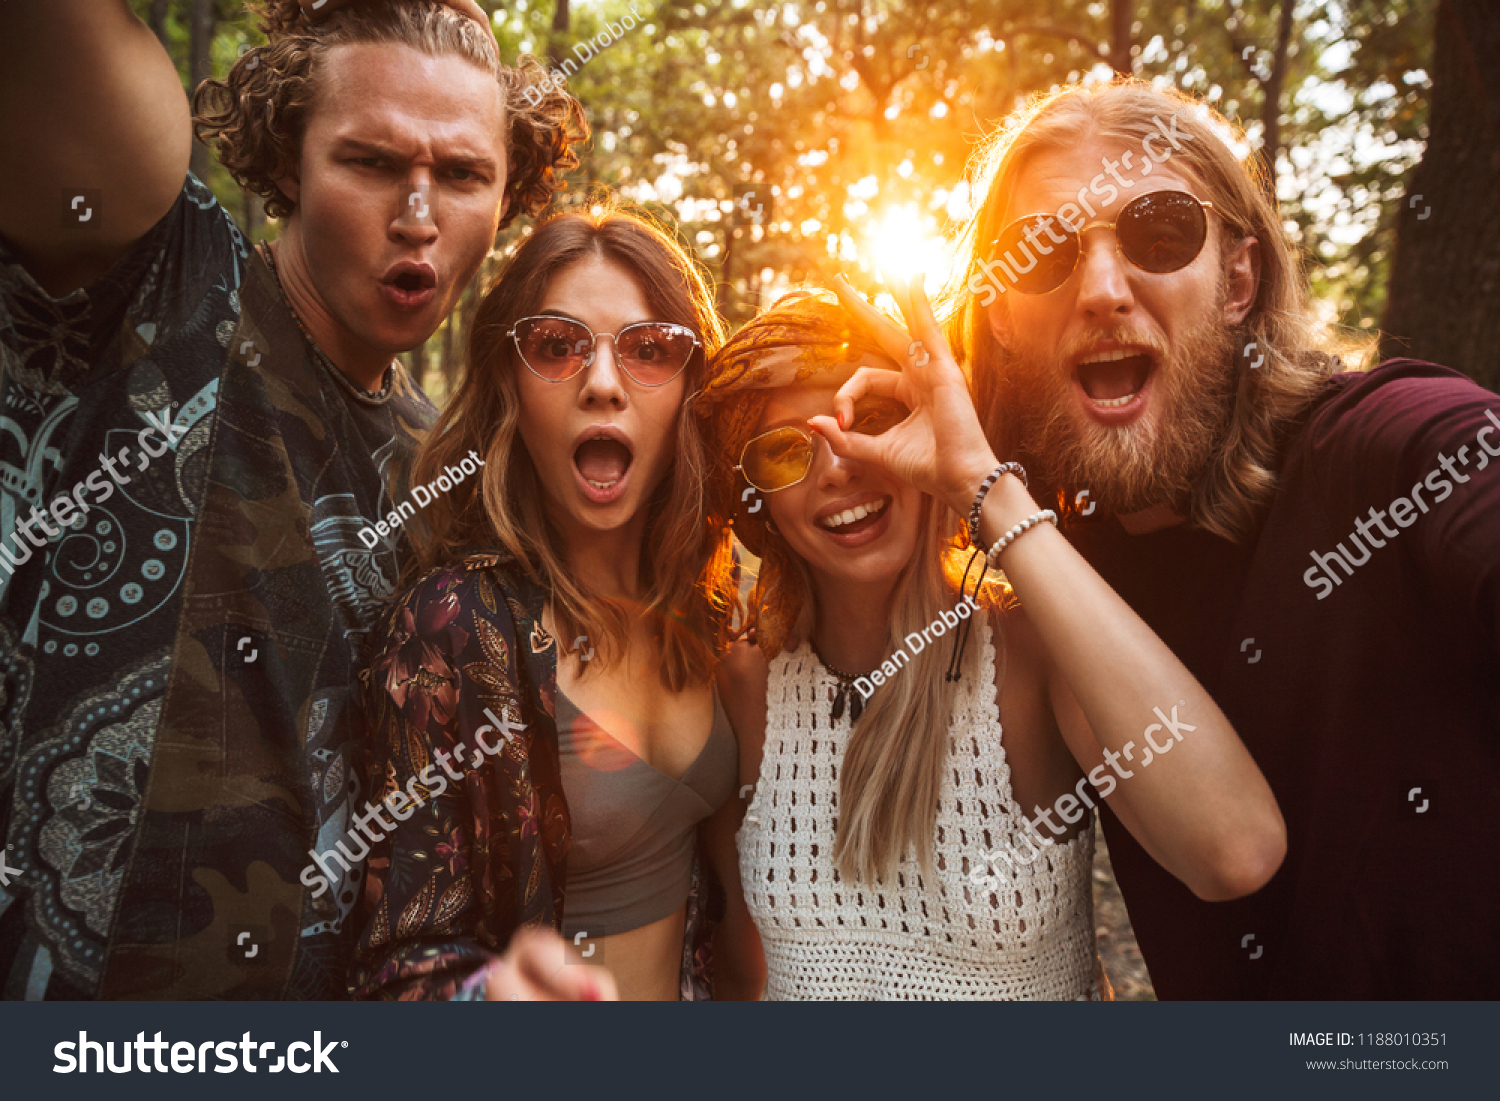 Photo of cheerful hippies men and women smiling and taking selfie in forest #1188010351